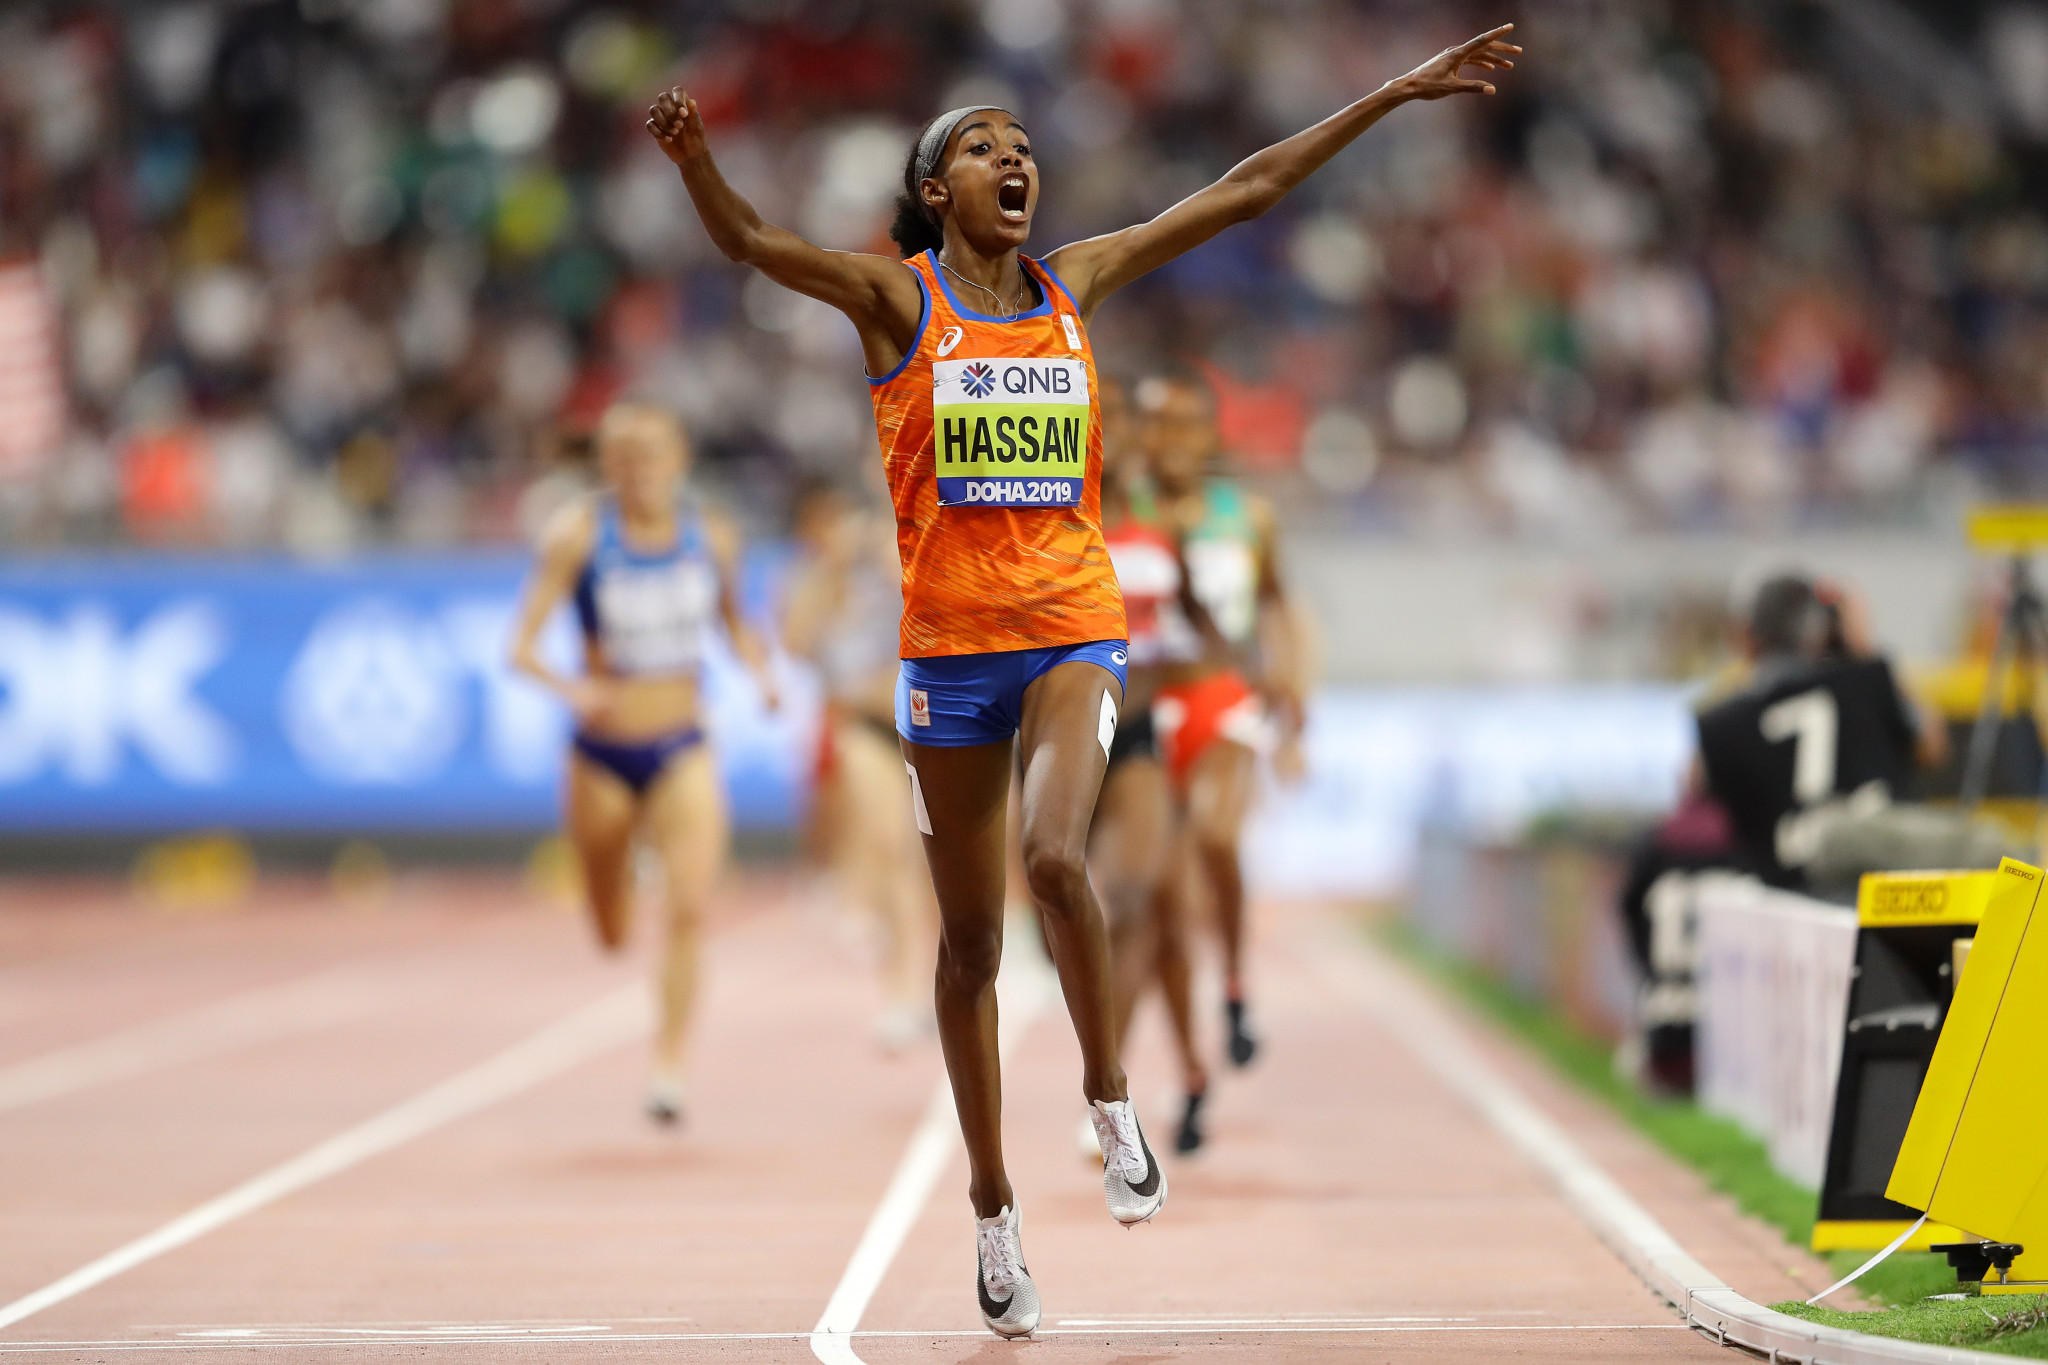 Sifan Hassan won two golds at the World Championships amid the controversy surrounding her coach Alberto Salazar  ©Getty Images